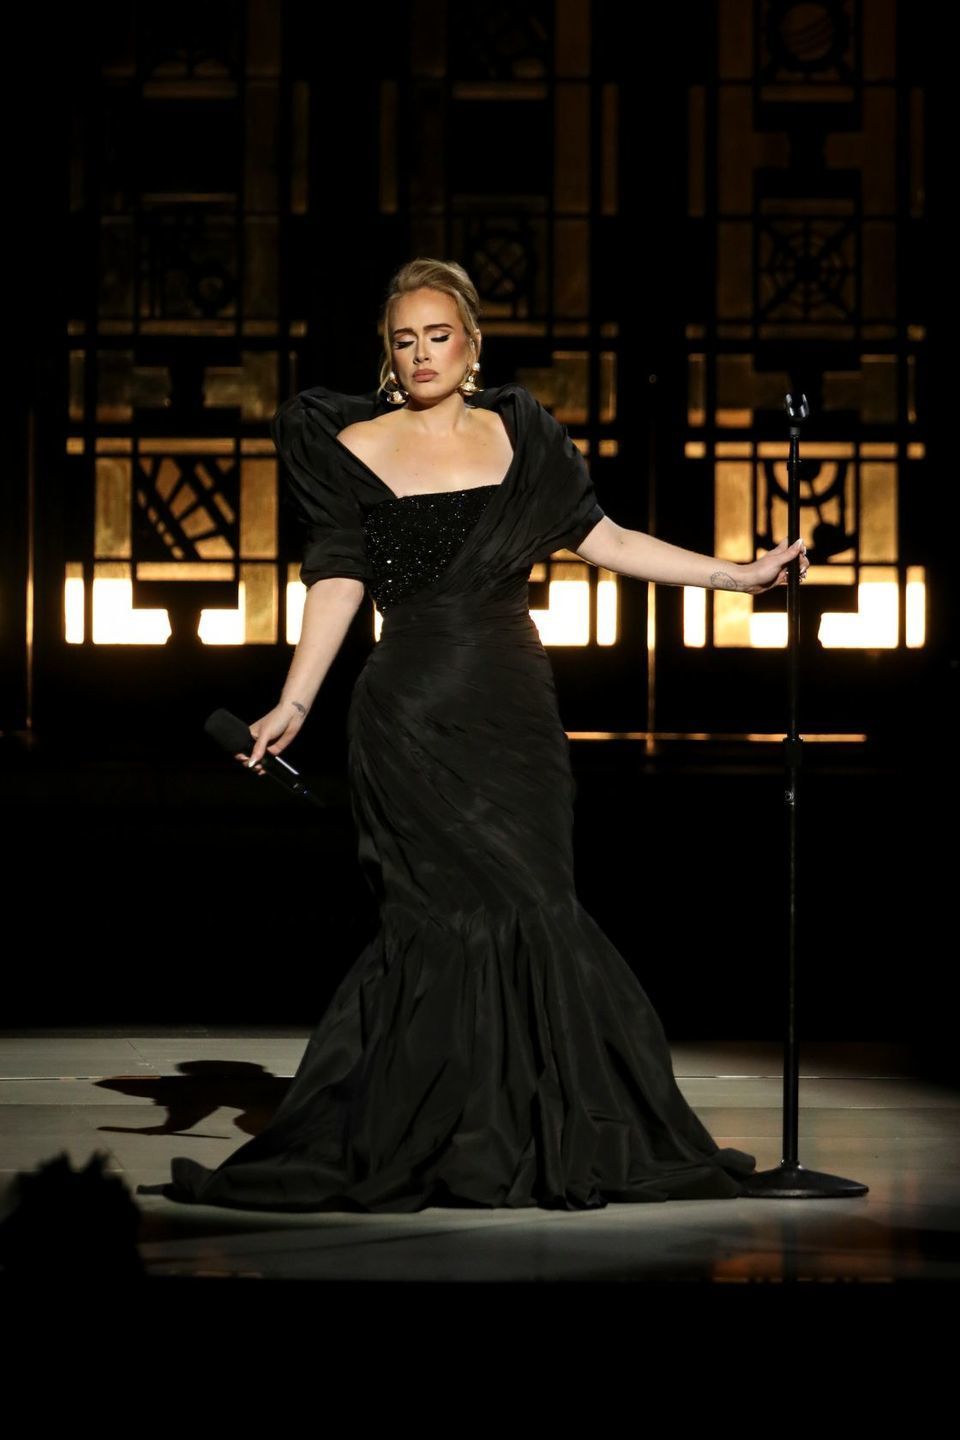 Adele sings old favourites and new songs at the Griffith Observatory in Los Angeles, USA.